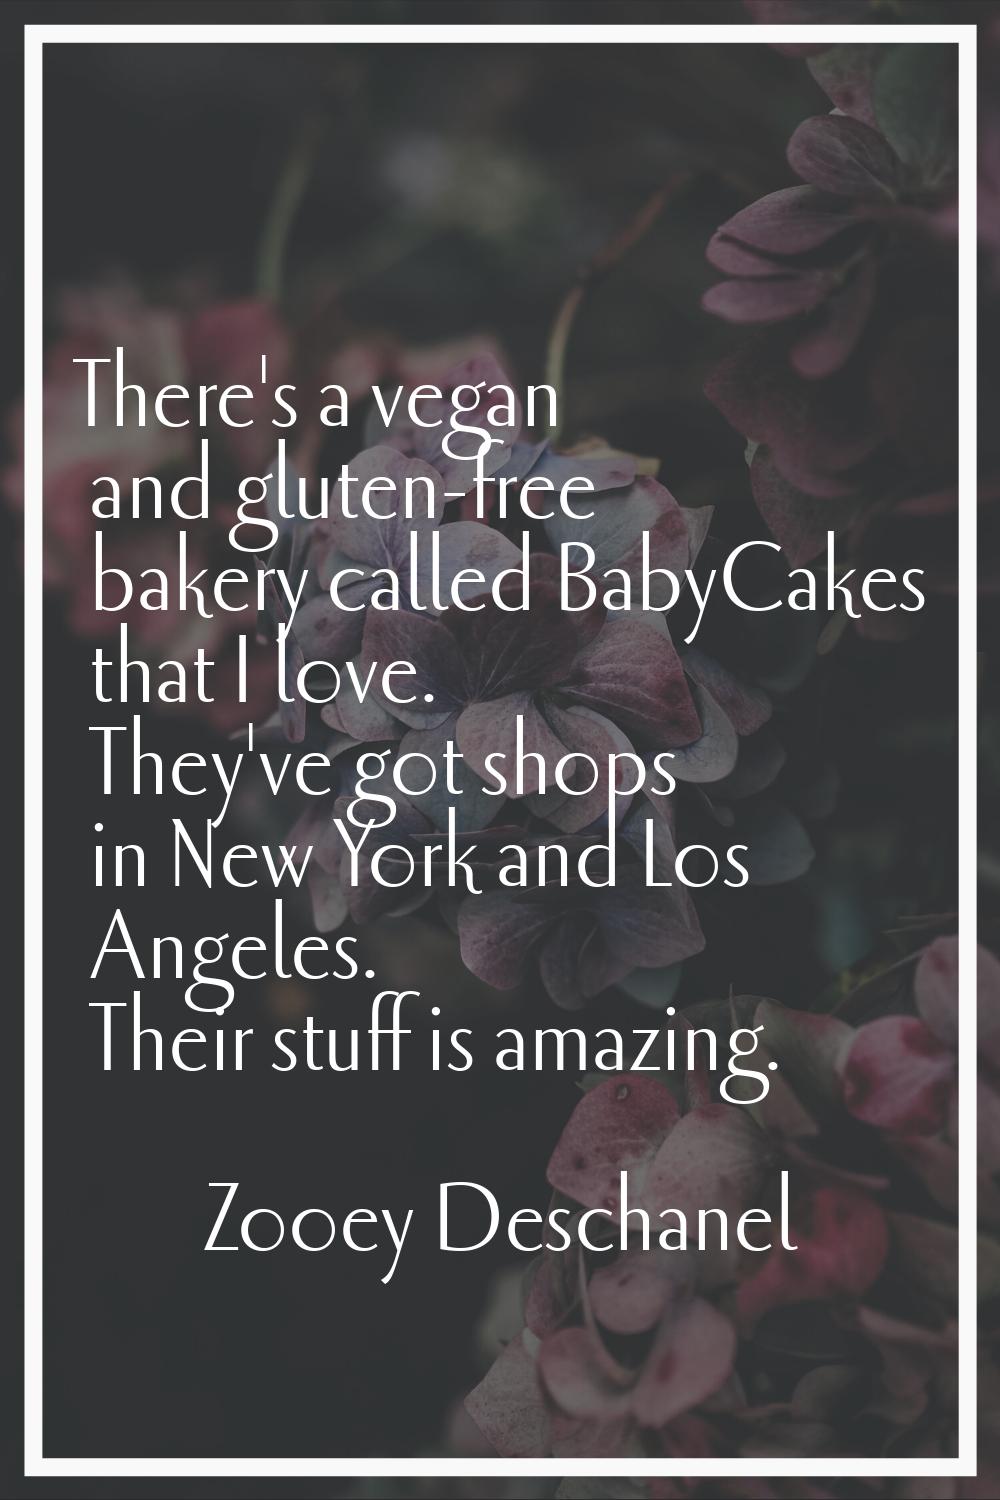 There's a vegan and gluten-free bakery called BabyCakes that I love. They've got shops in New York 